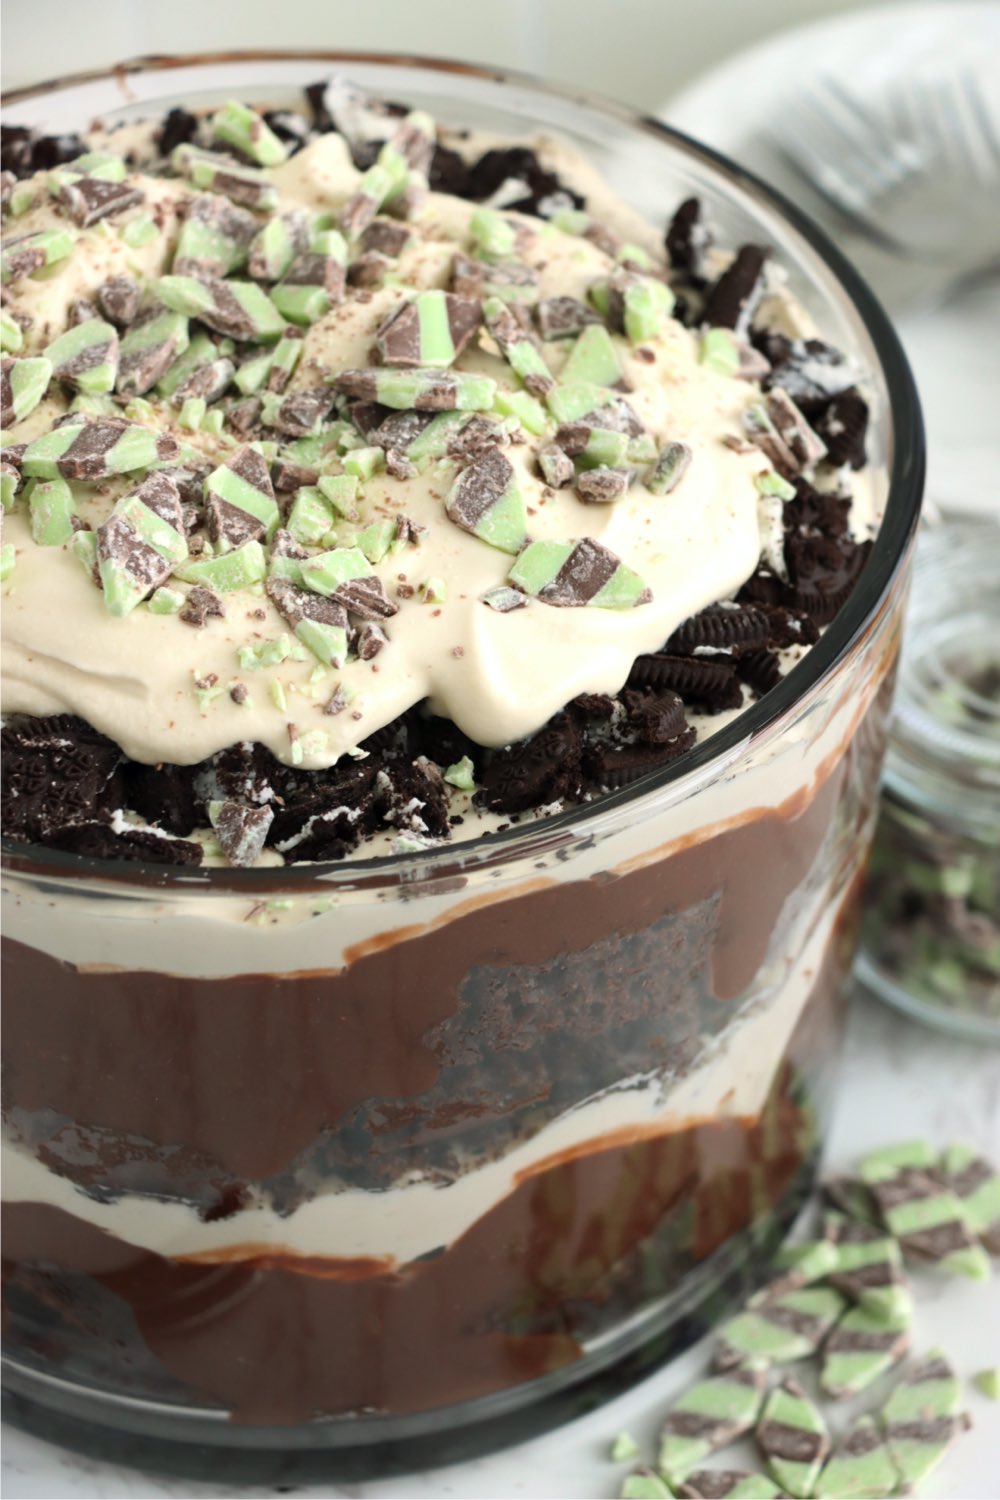 Trifle topped with crushed Oreos and Andes mints